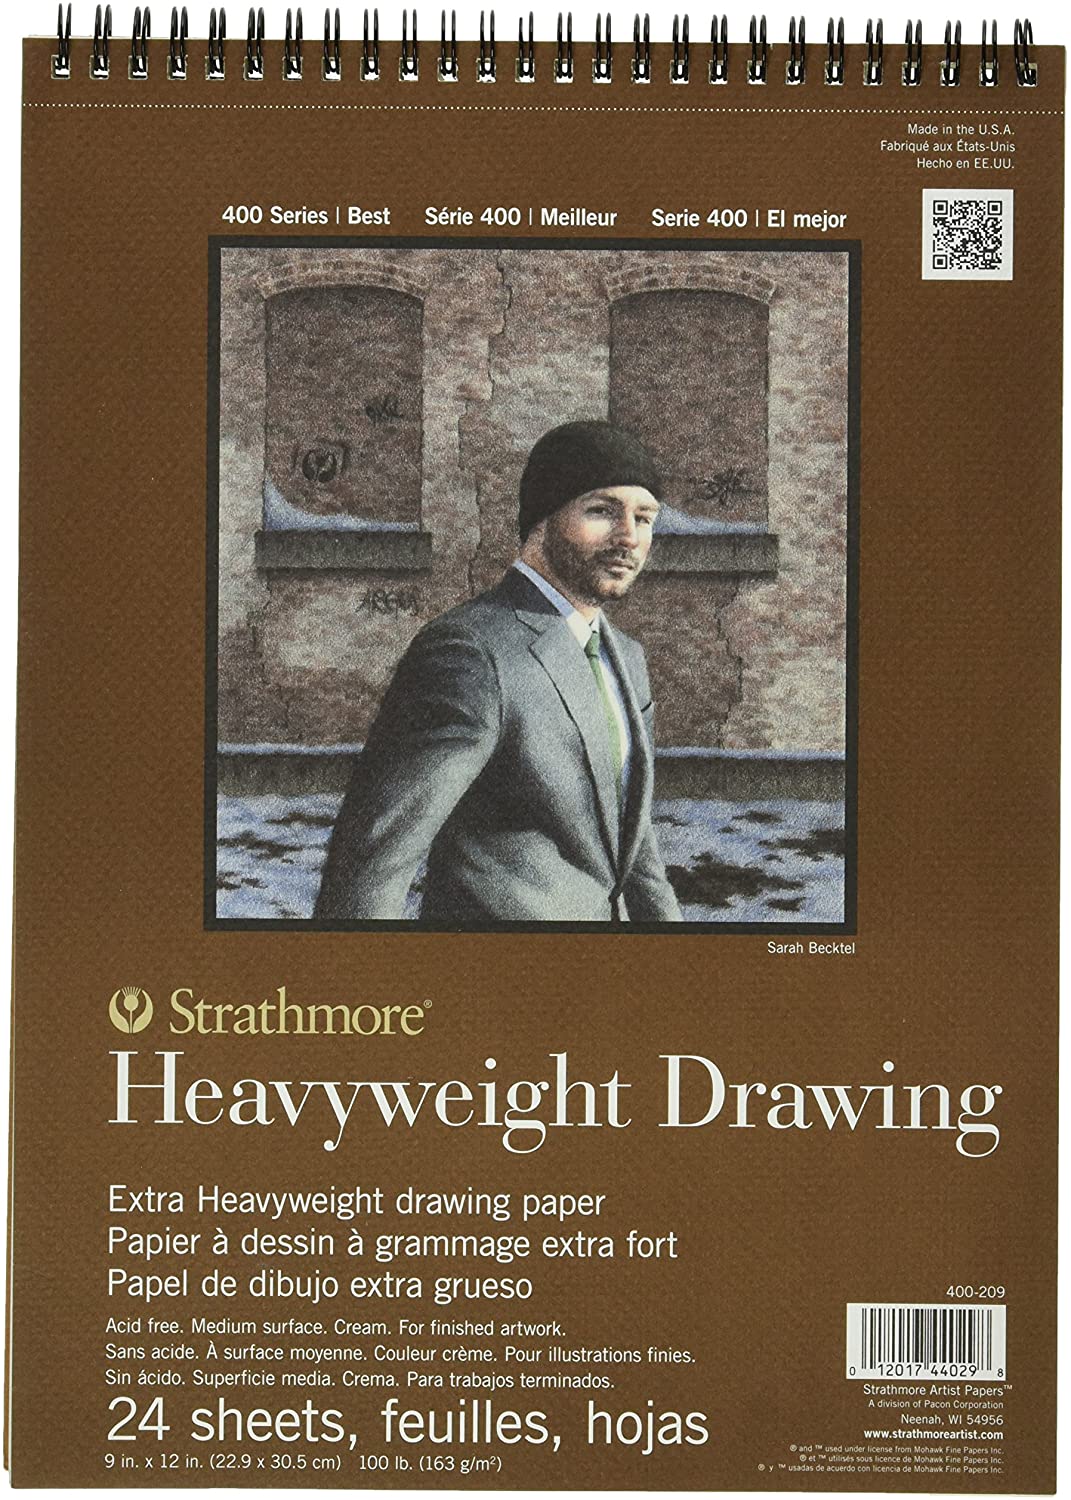 Strathmore 400 Series Heavyweight Drawing Pad